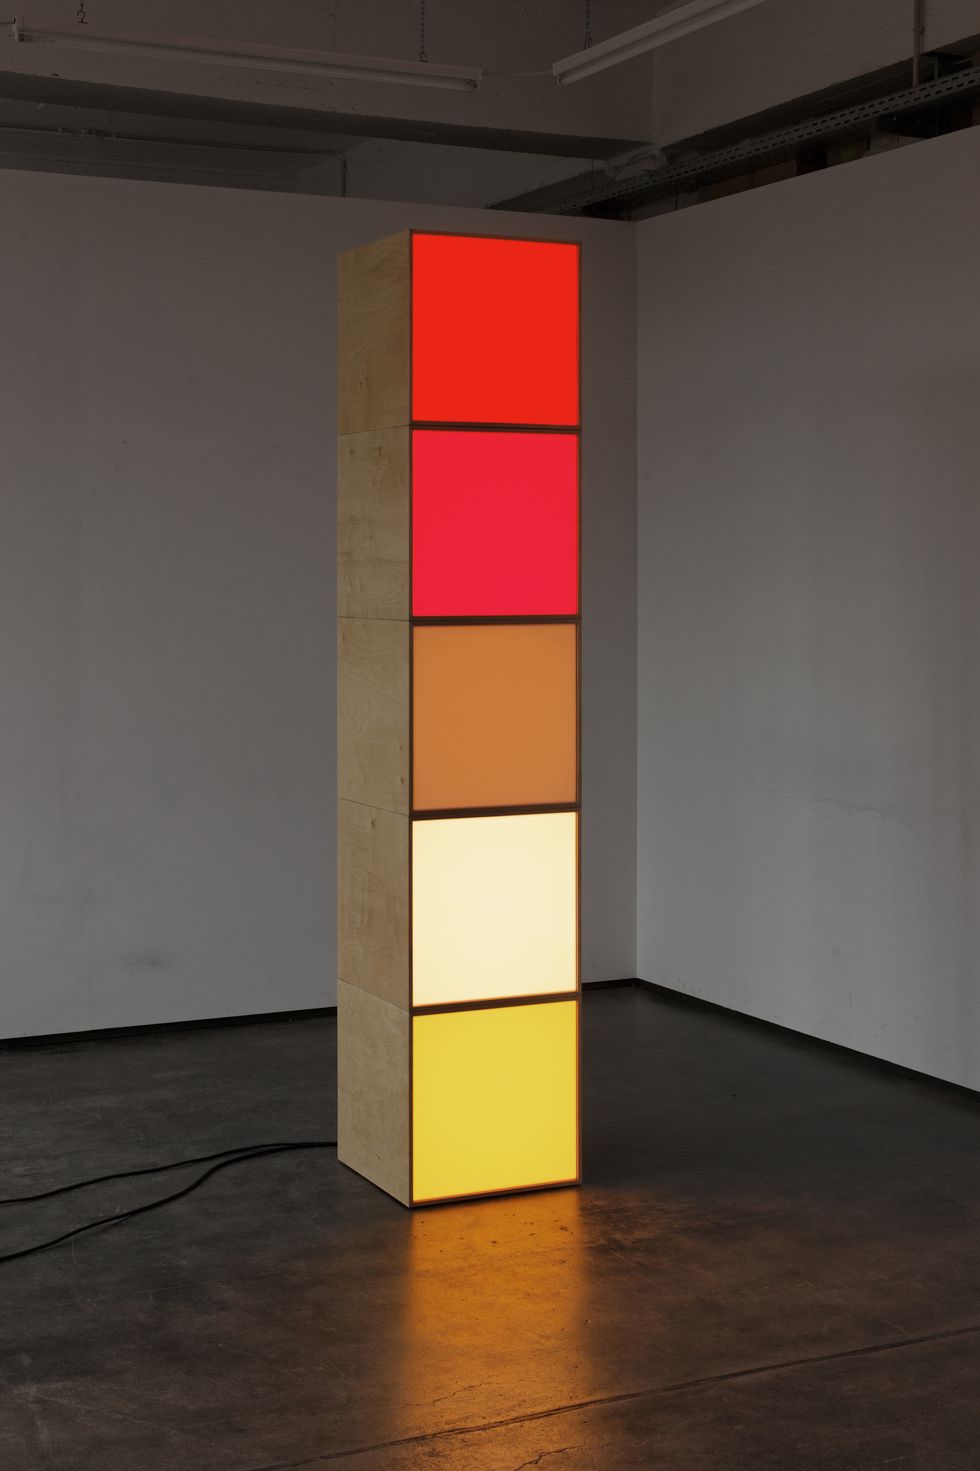 angela bulloch, ﻿stack of five, 2015, ubs art collection